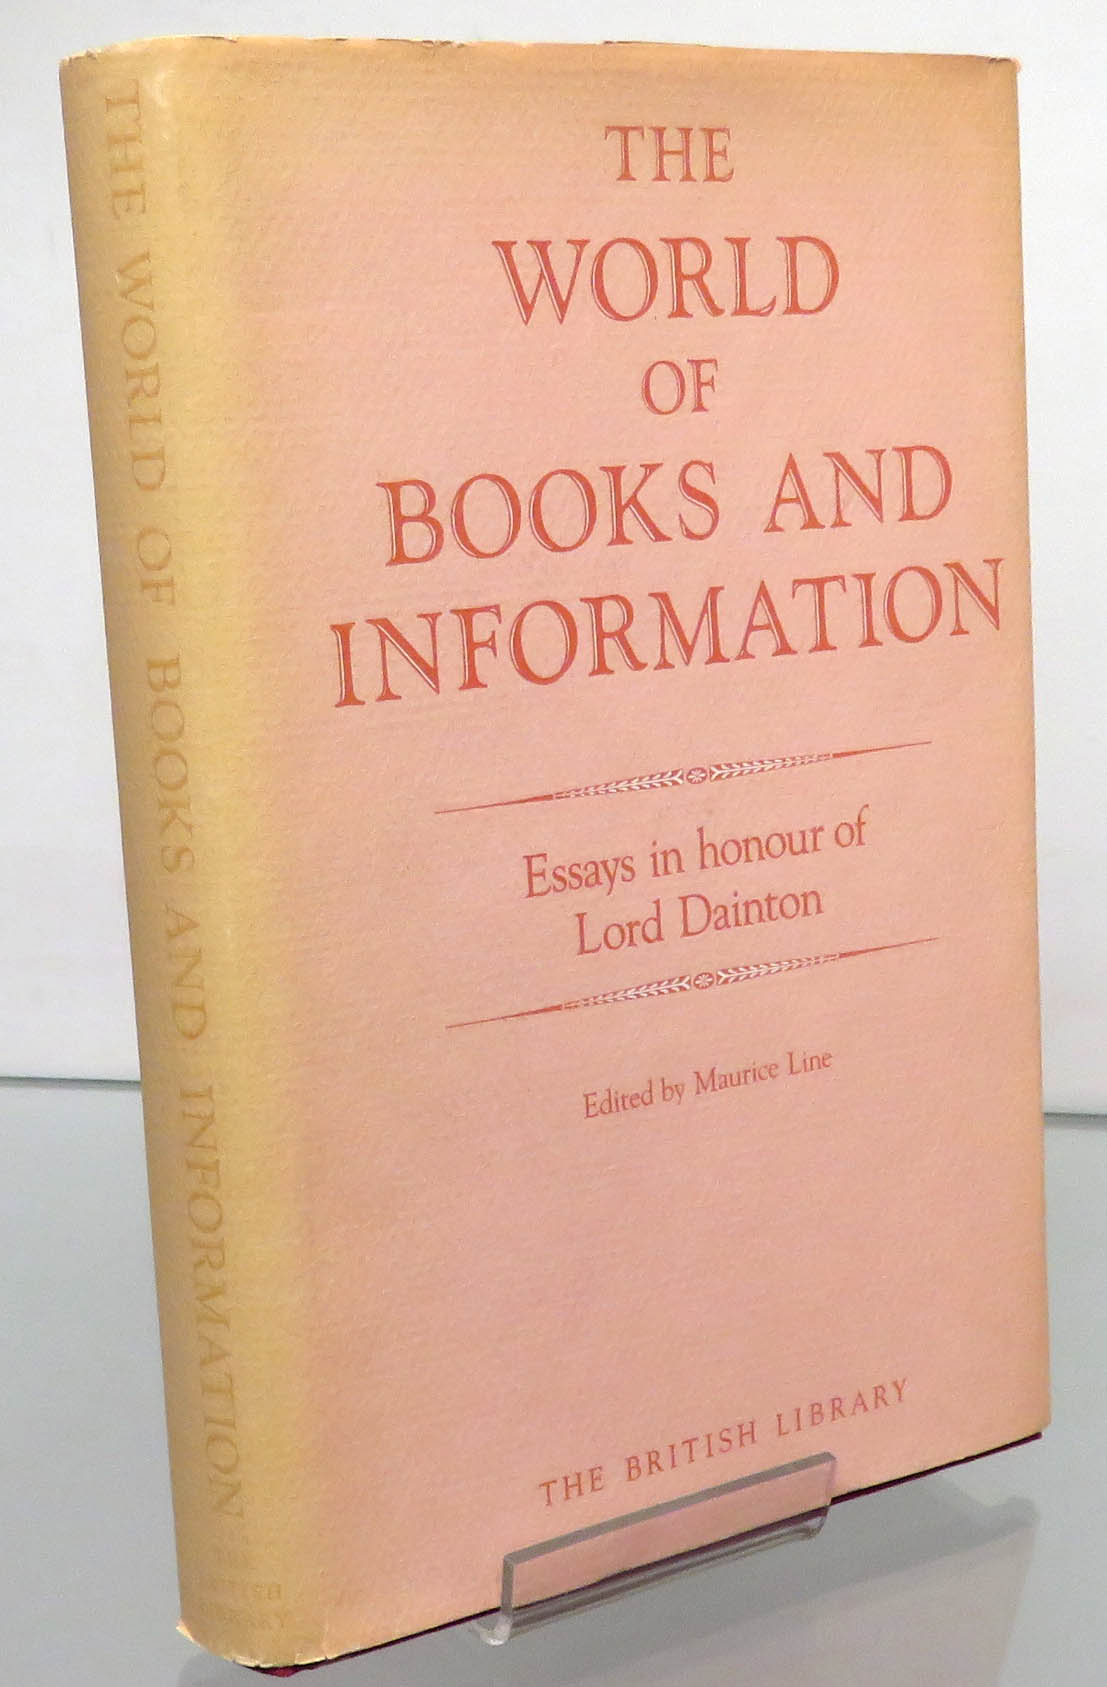 The World Of Books And Information. Essays in honour of Lord Dainton 